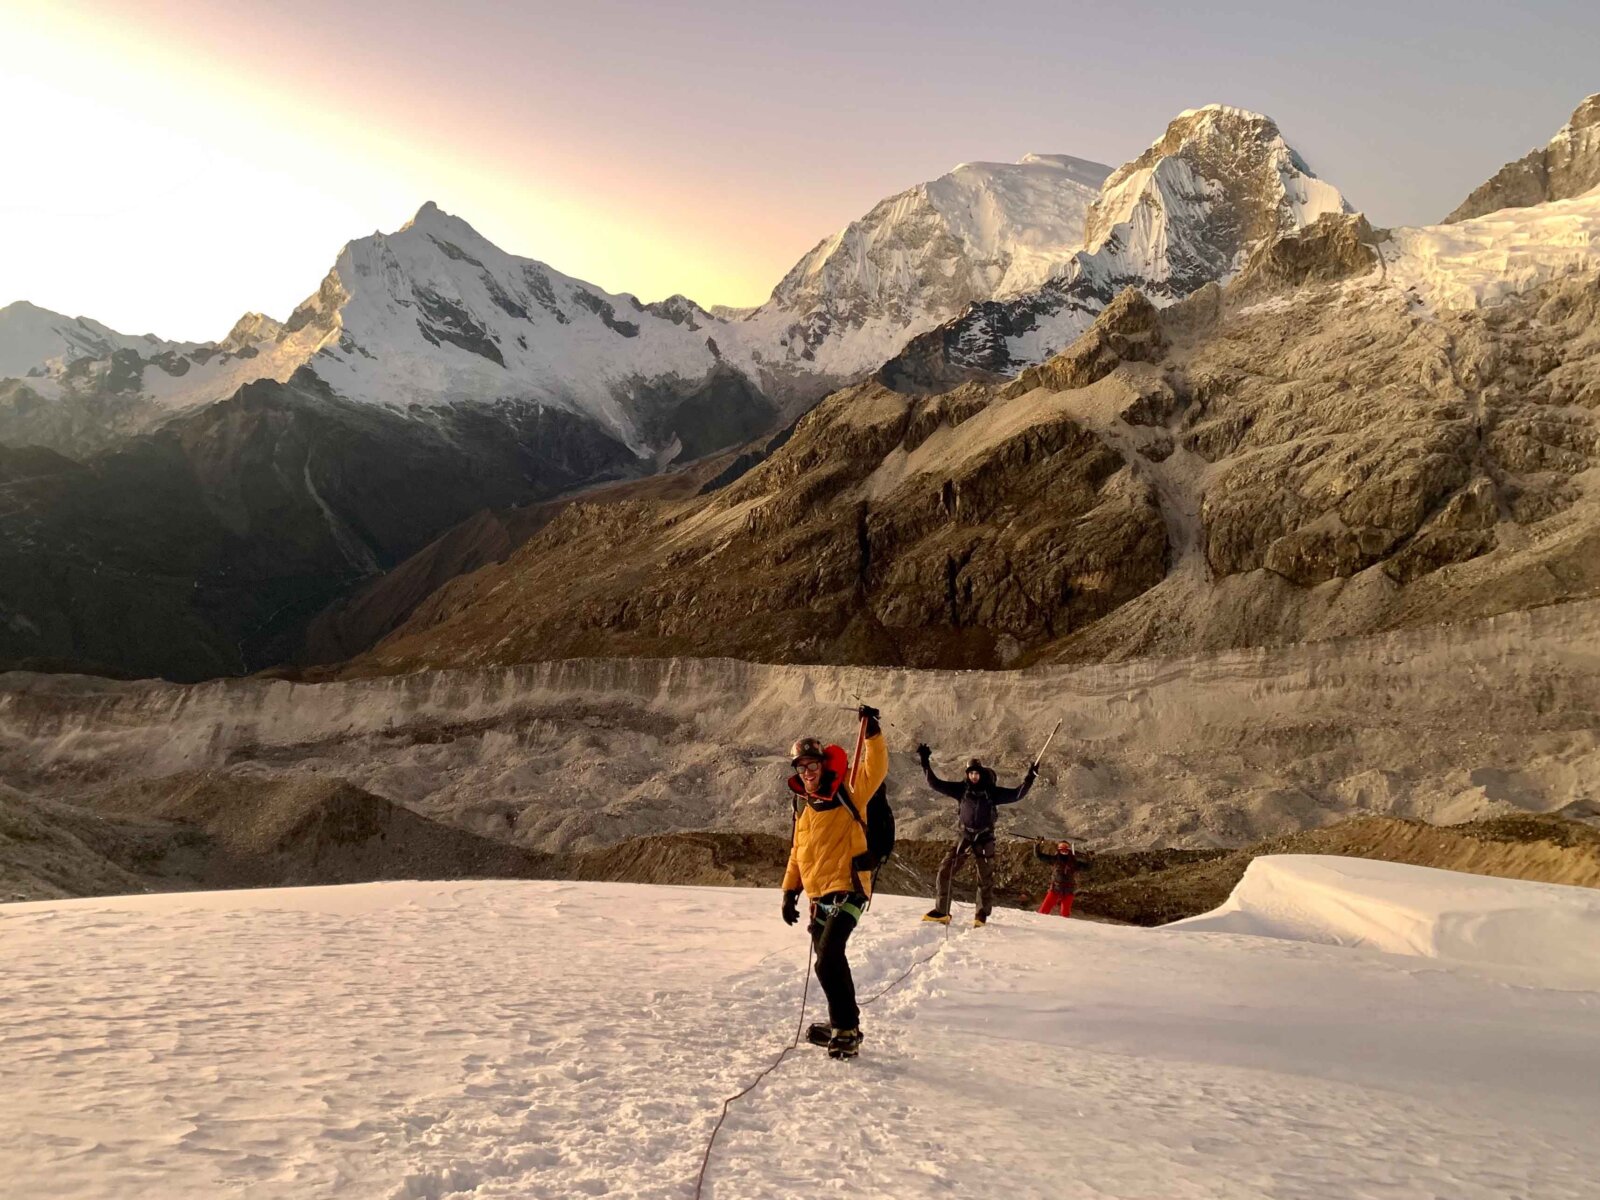 Two mountaineering raising their arms in triumph while standing on a glacier at sunrise in Peru.